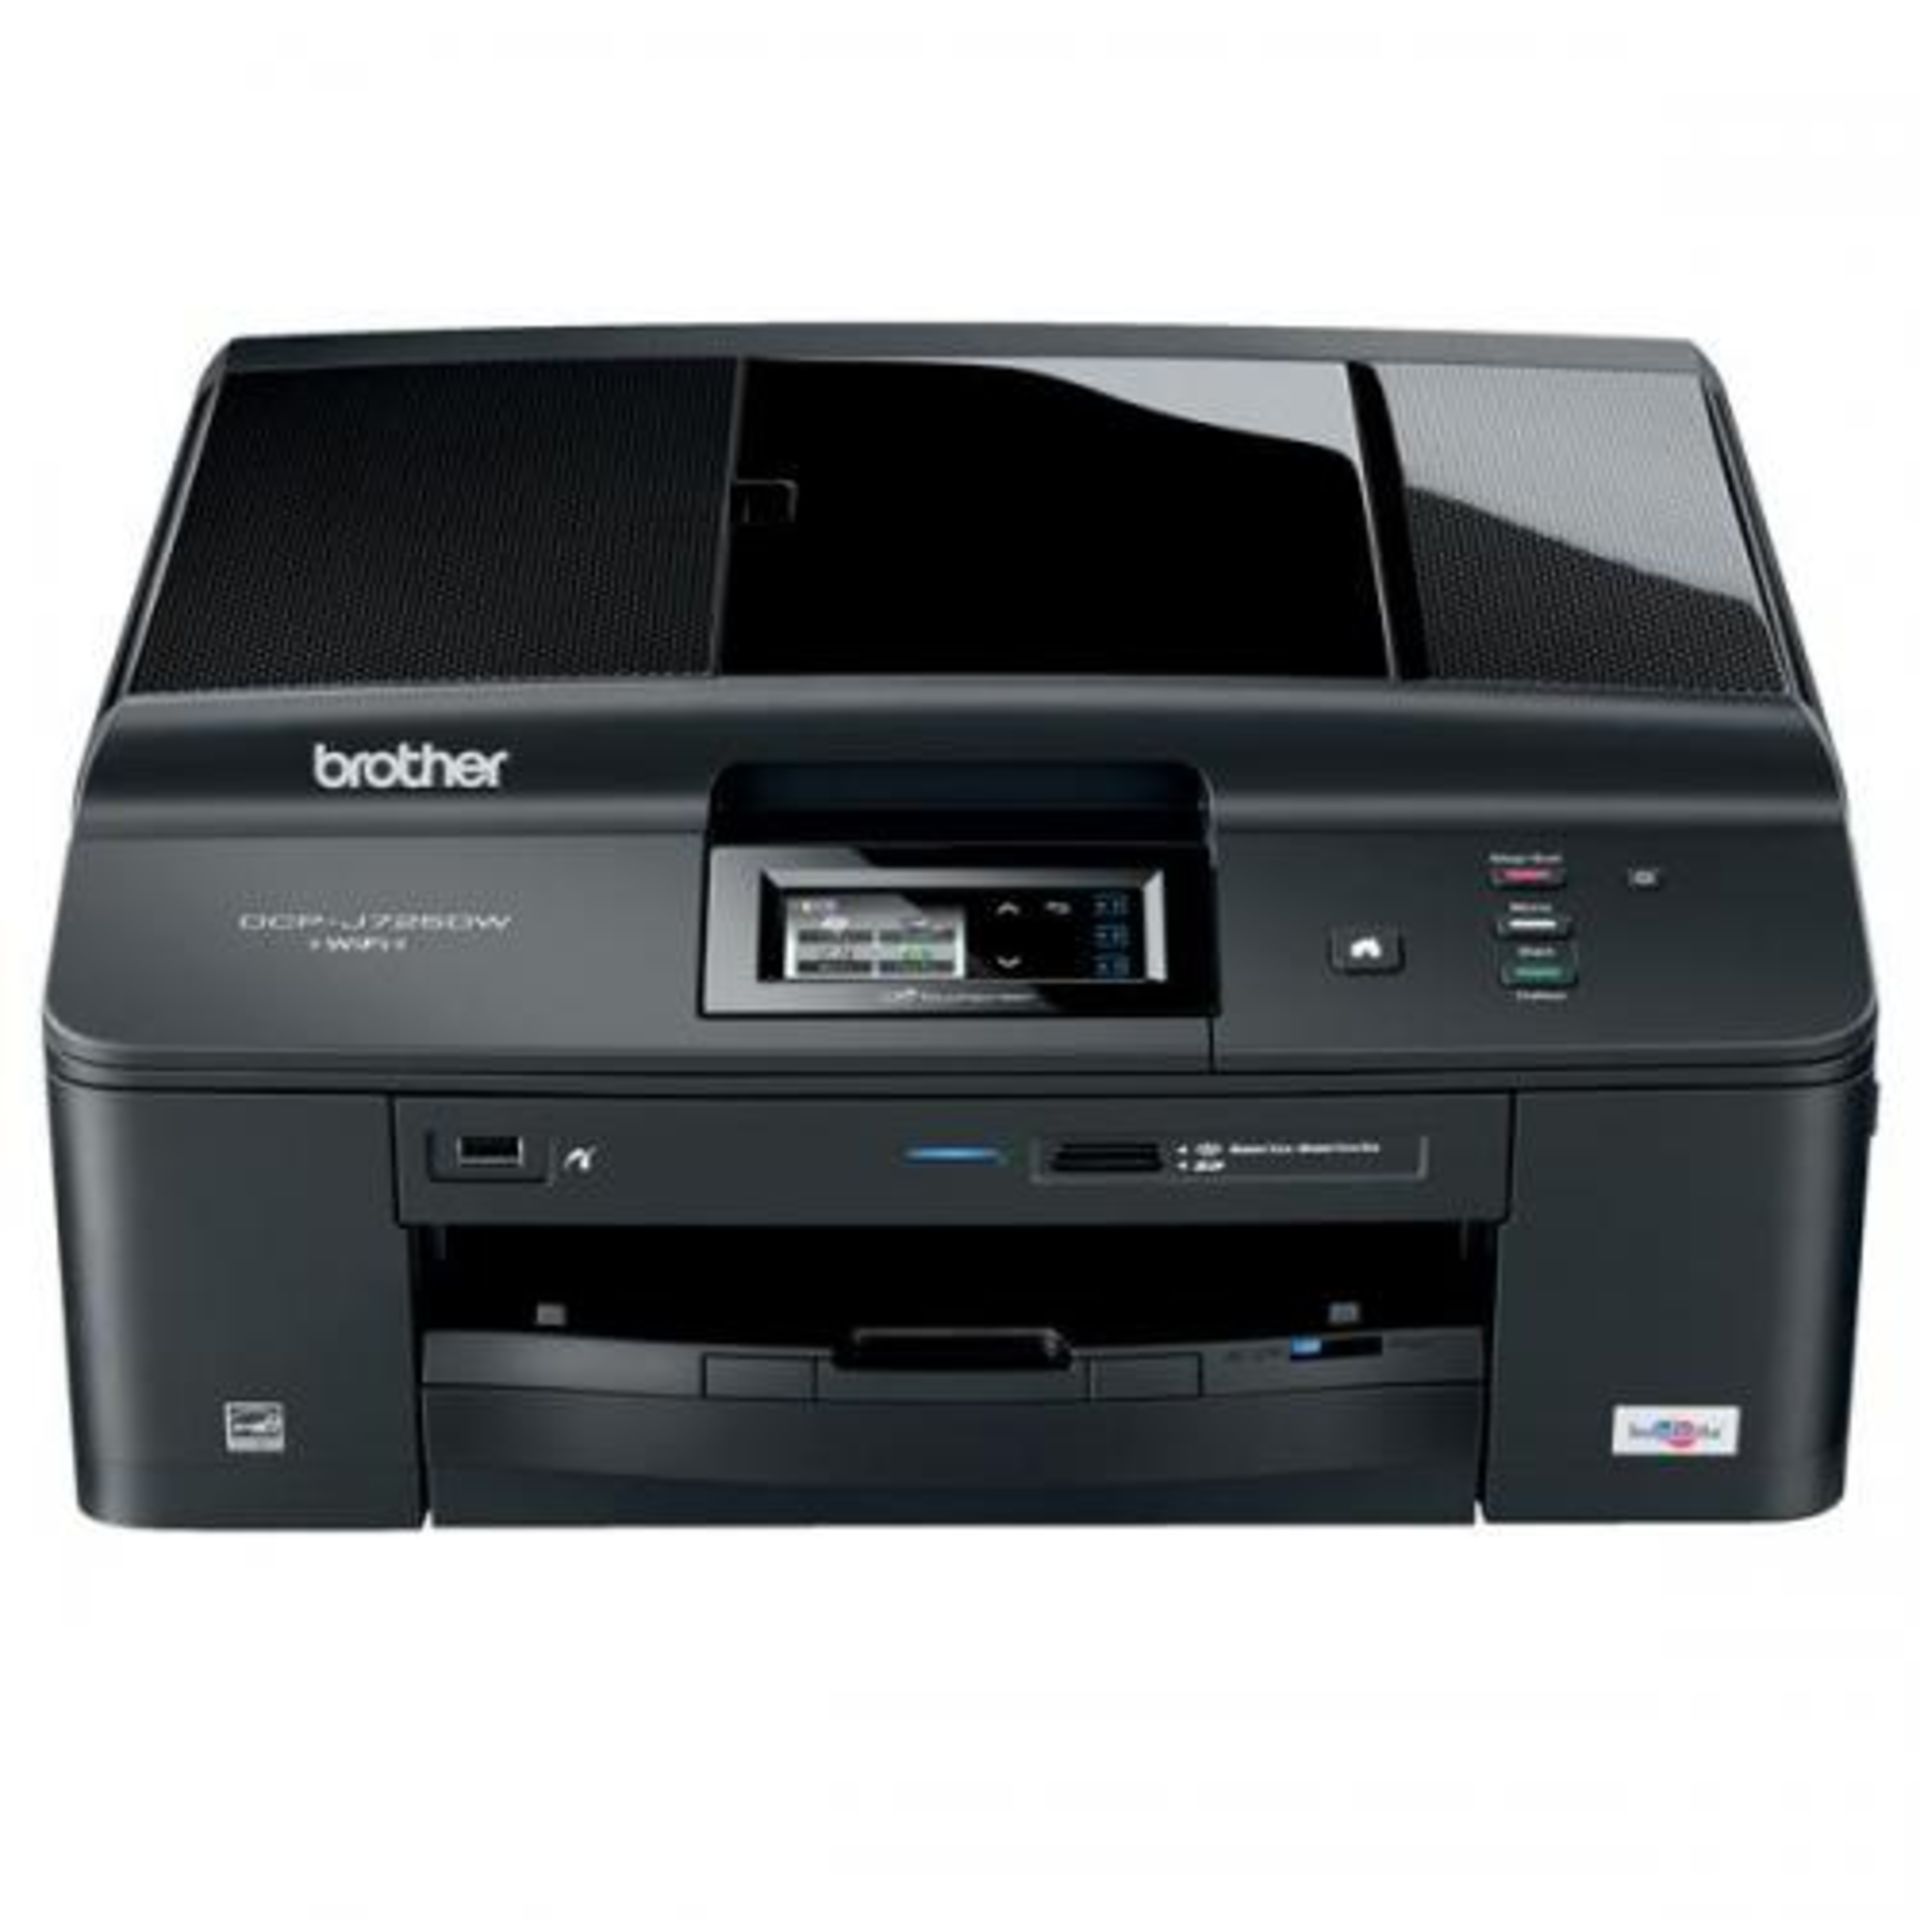 (R13C) 1 X Brother DCP-J725DW All In One Printer. Built In Wi-Fi, Stand Alone Scanner & Copier, Bord